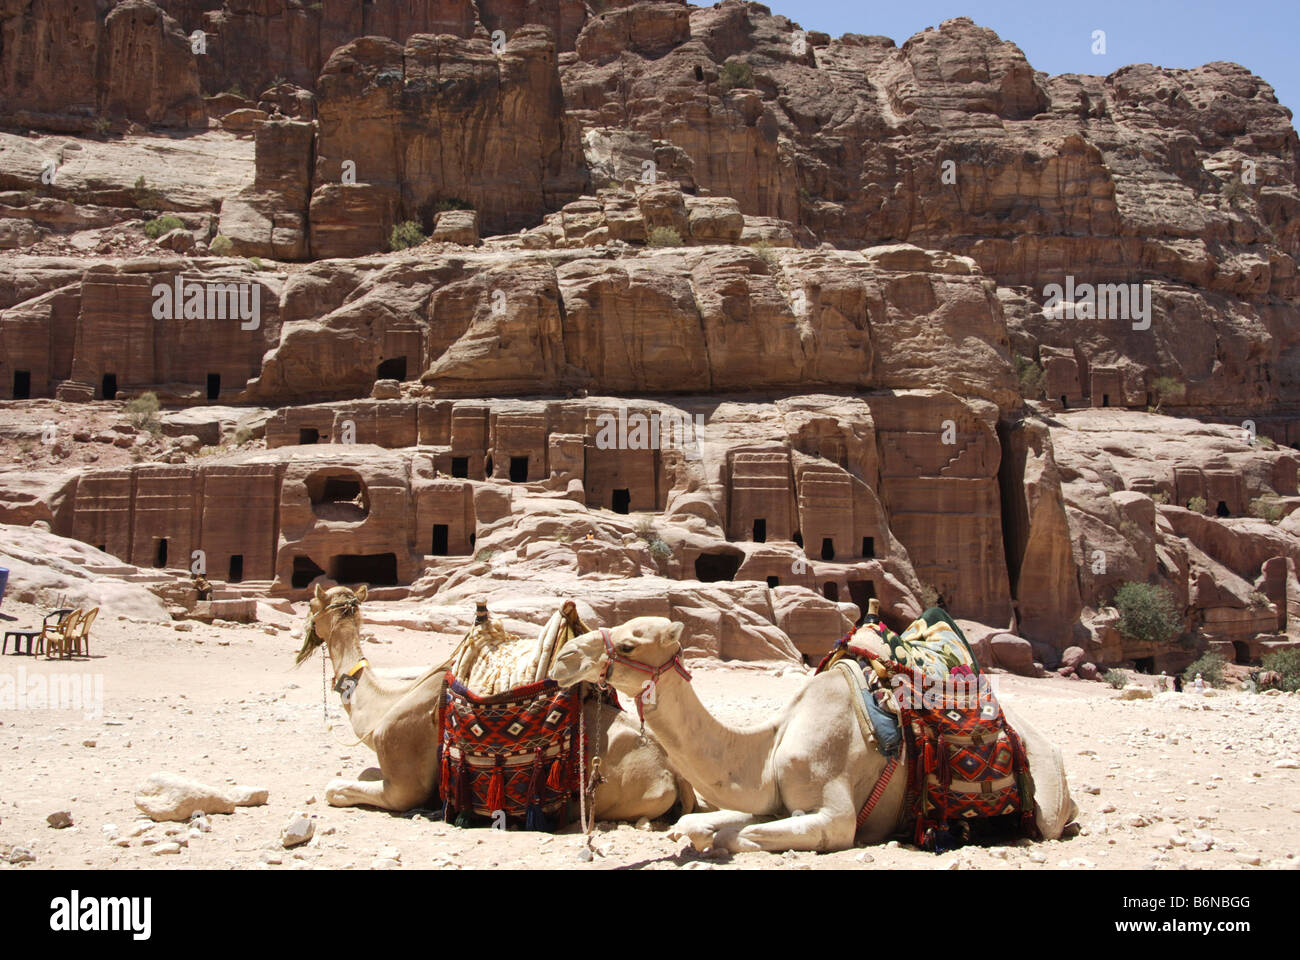 Camels resting in front of tombs in Petra, Wadi Musa, Jordan Stock Photo